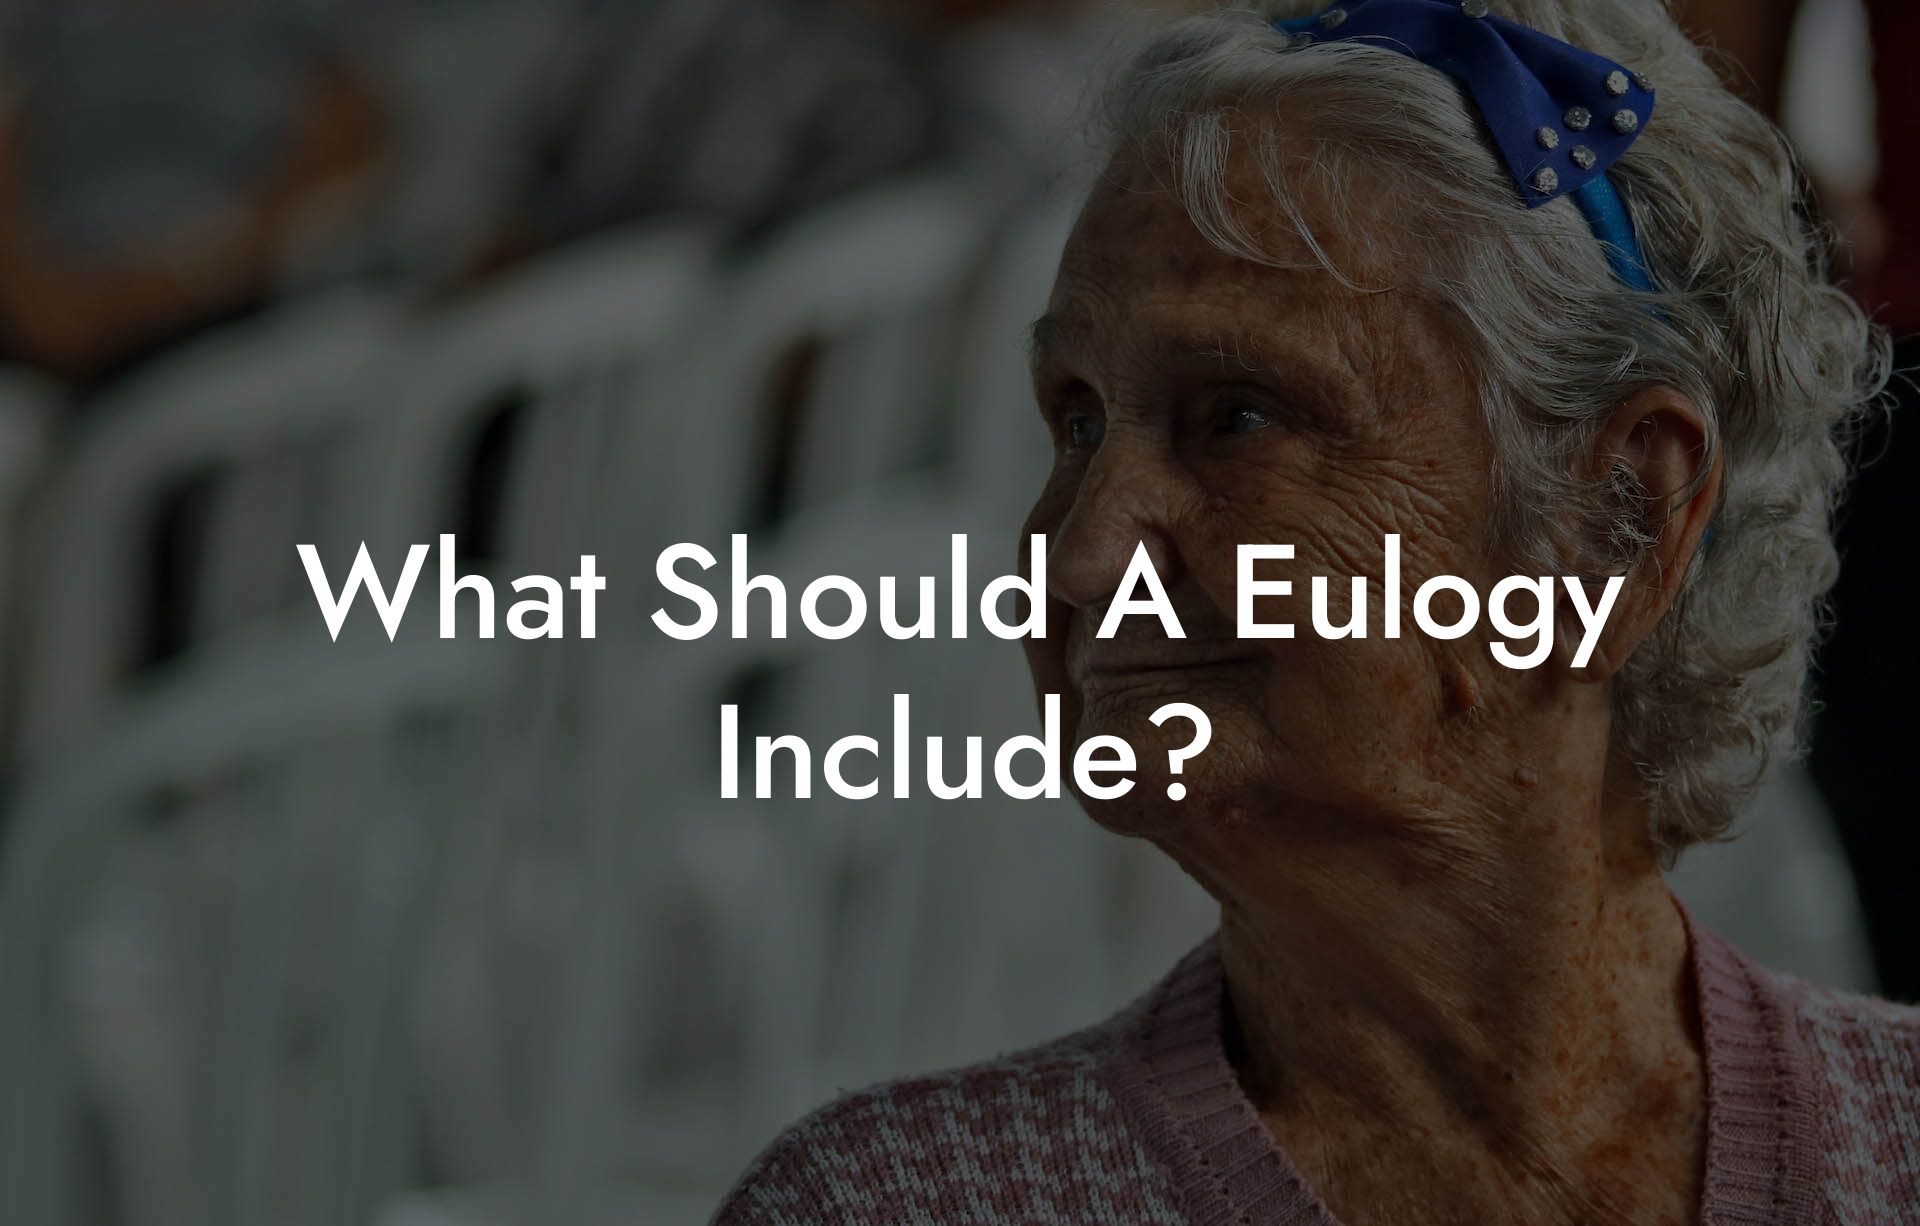 What Should A Eulogy Include?